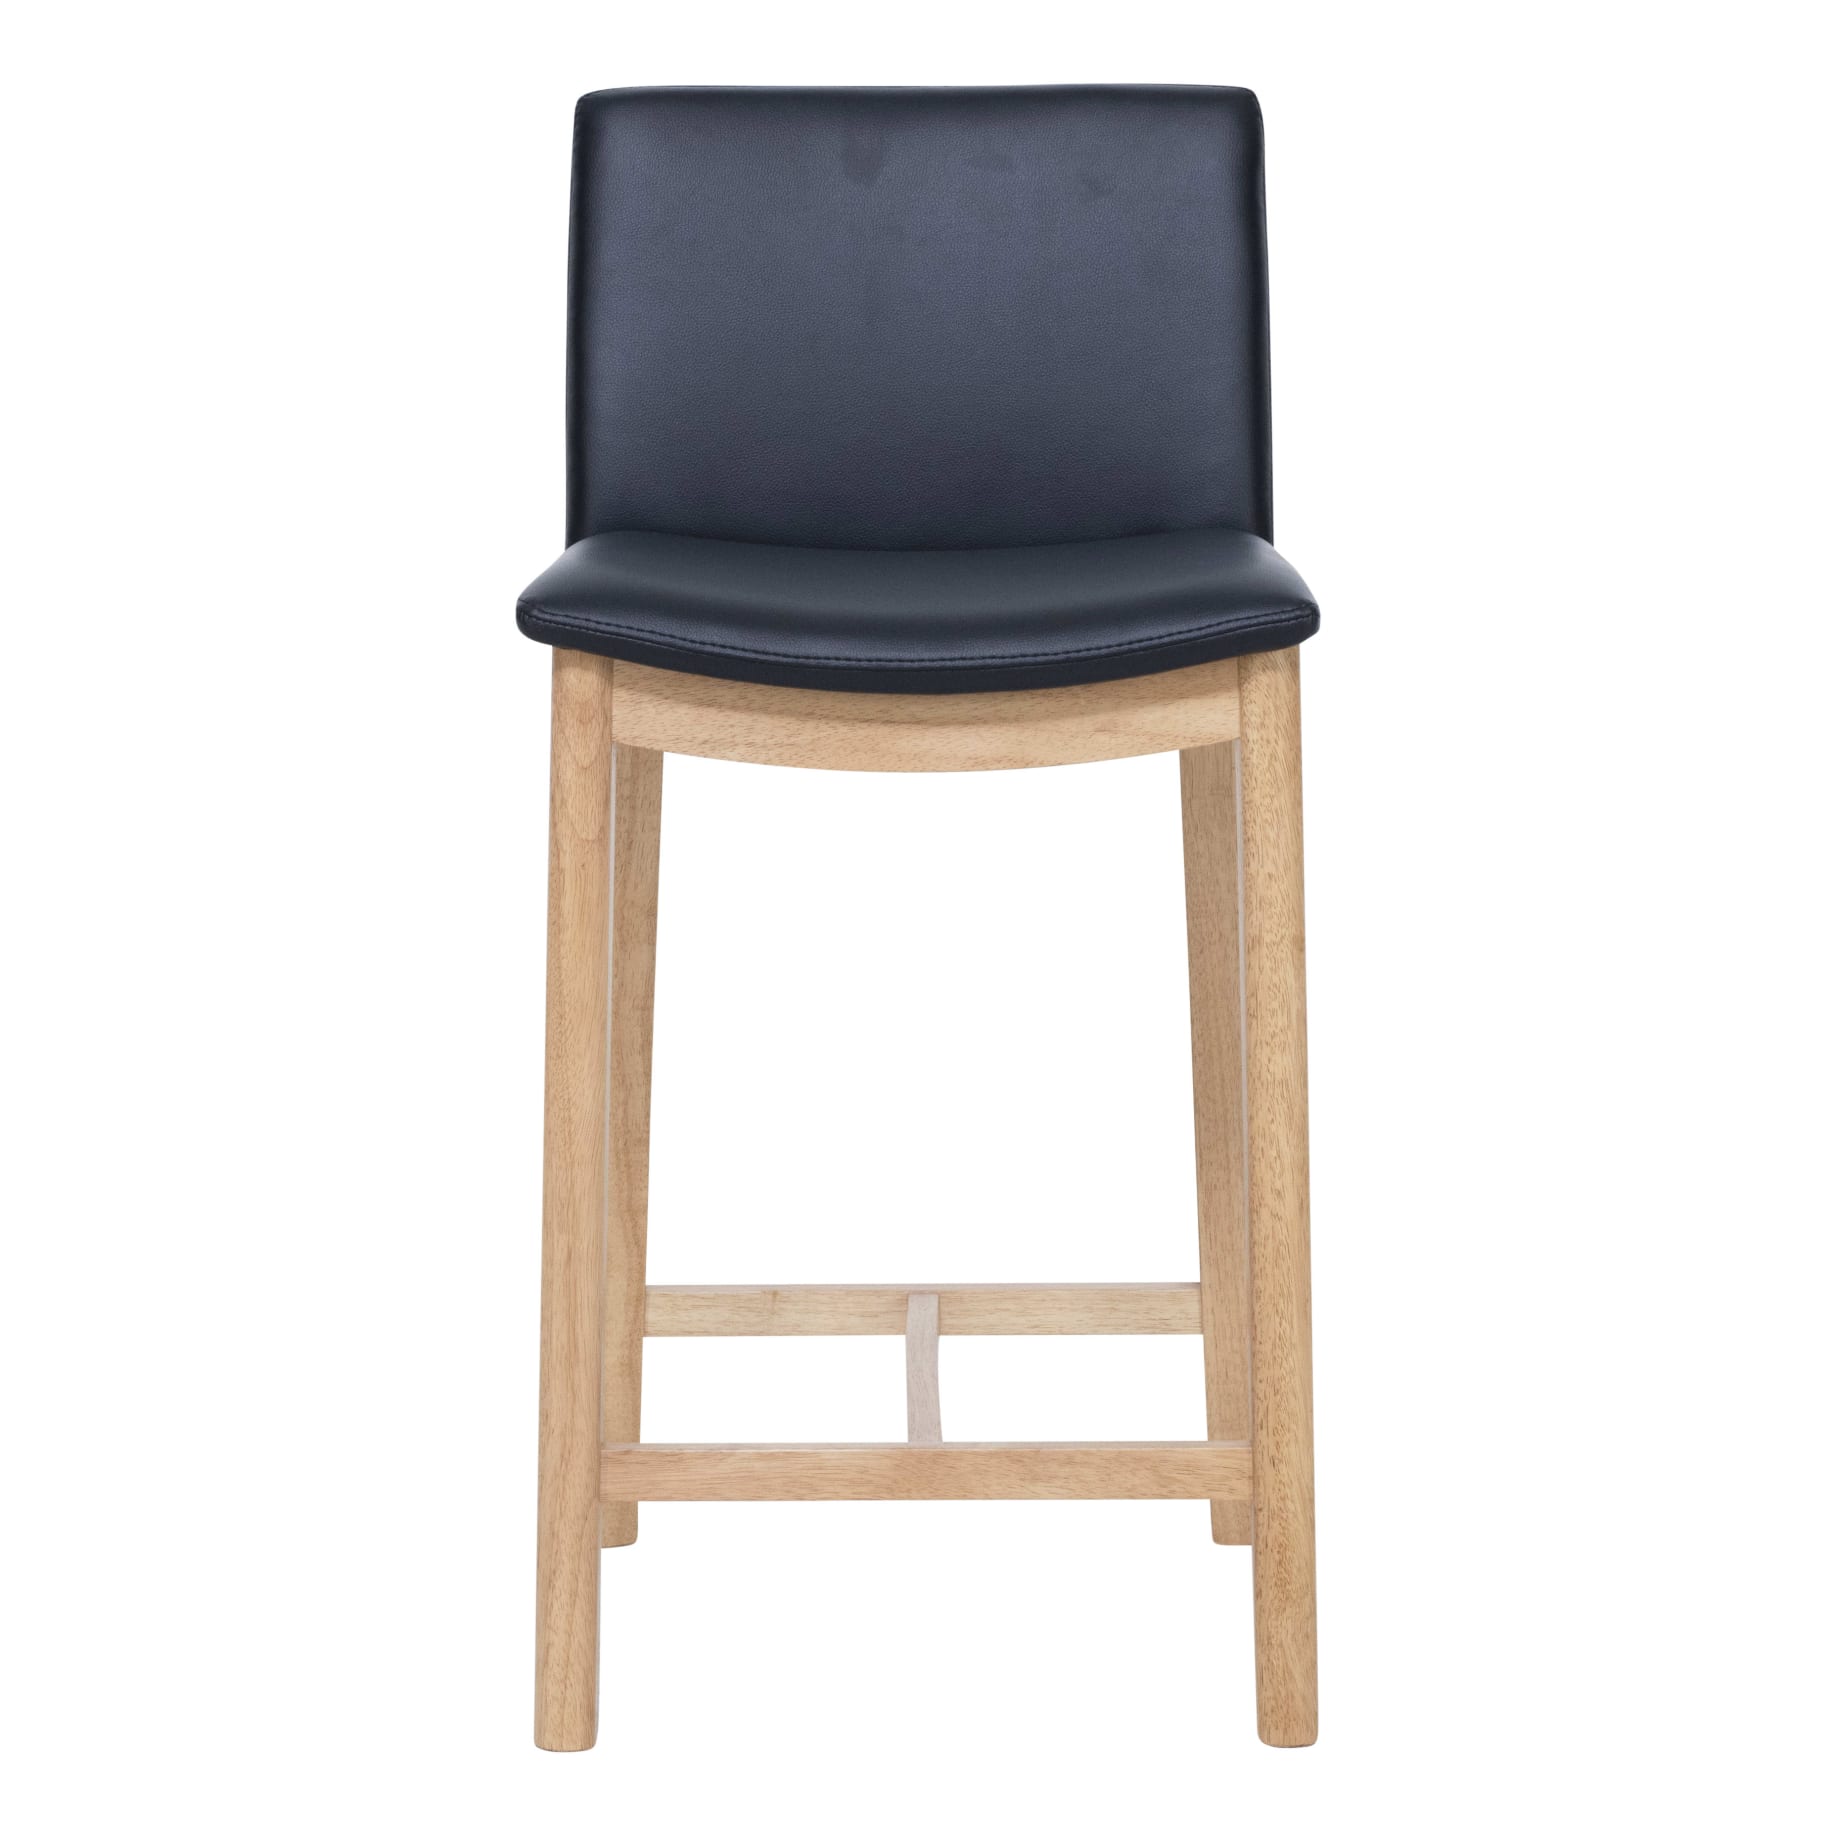 Everest Bar Chair in Black Leather / Oak Stain